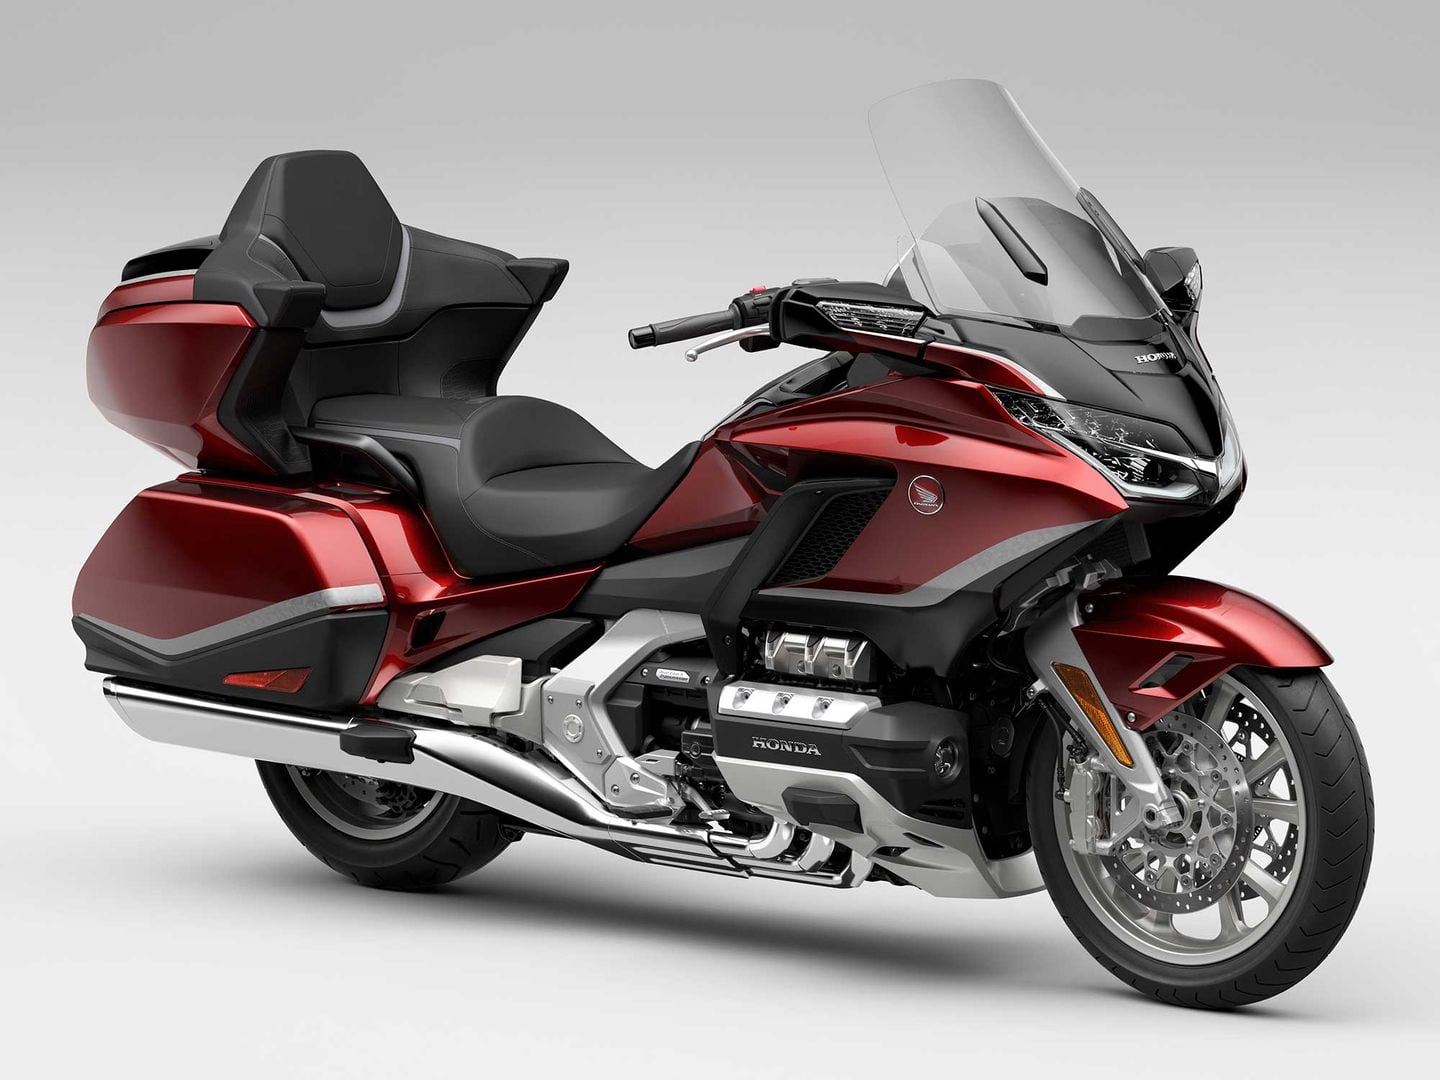 2021 Honda Gold Wing First Look | Cycle World